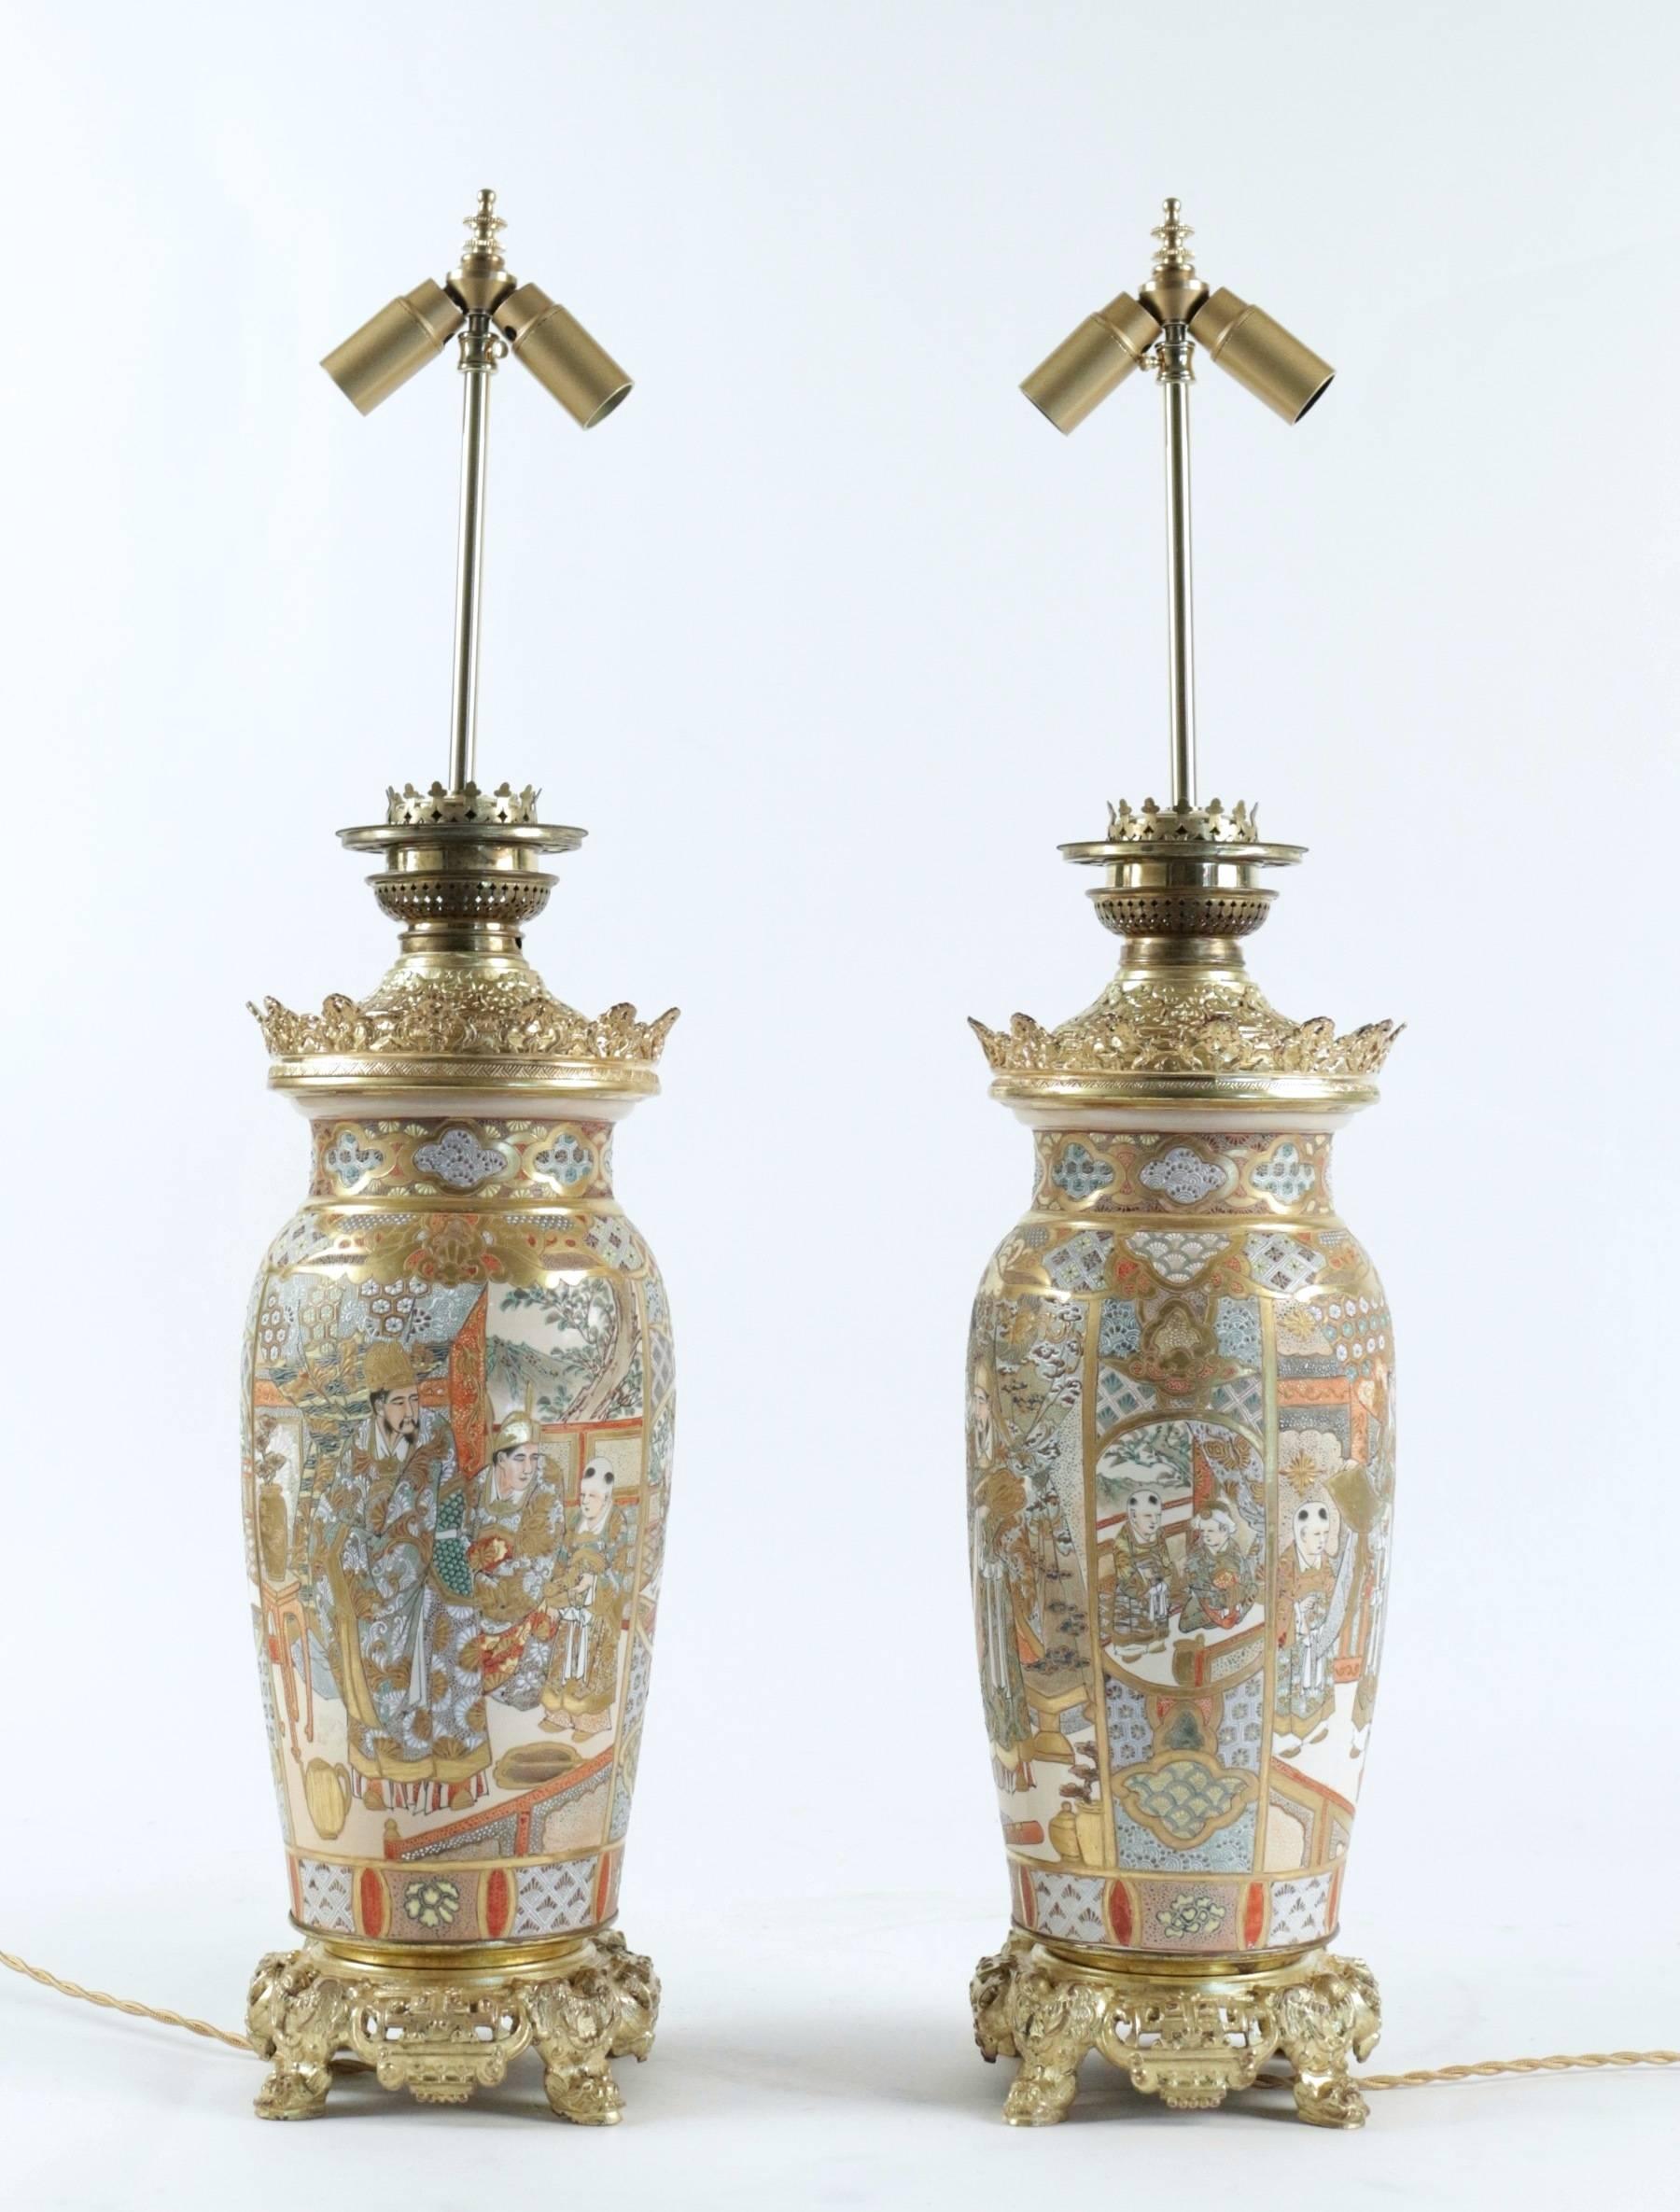 Fine faïence lamps
Mounted in gilt bronze
Made for electricity
Palace interior scene decor
circa 1880
Made for electricity, we can wire them for the U.S